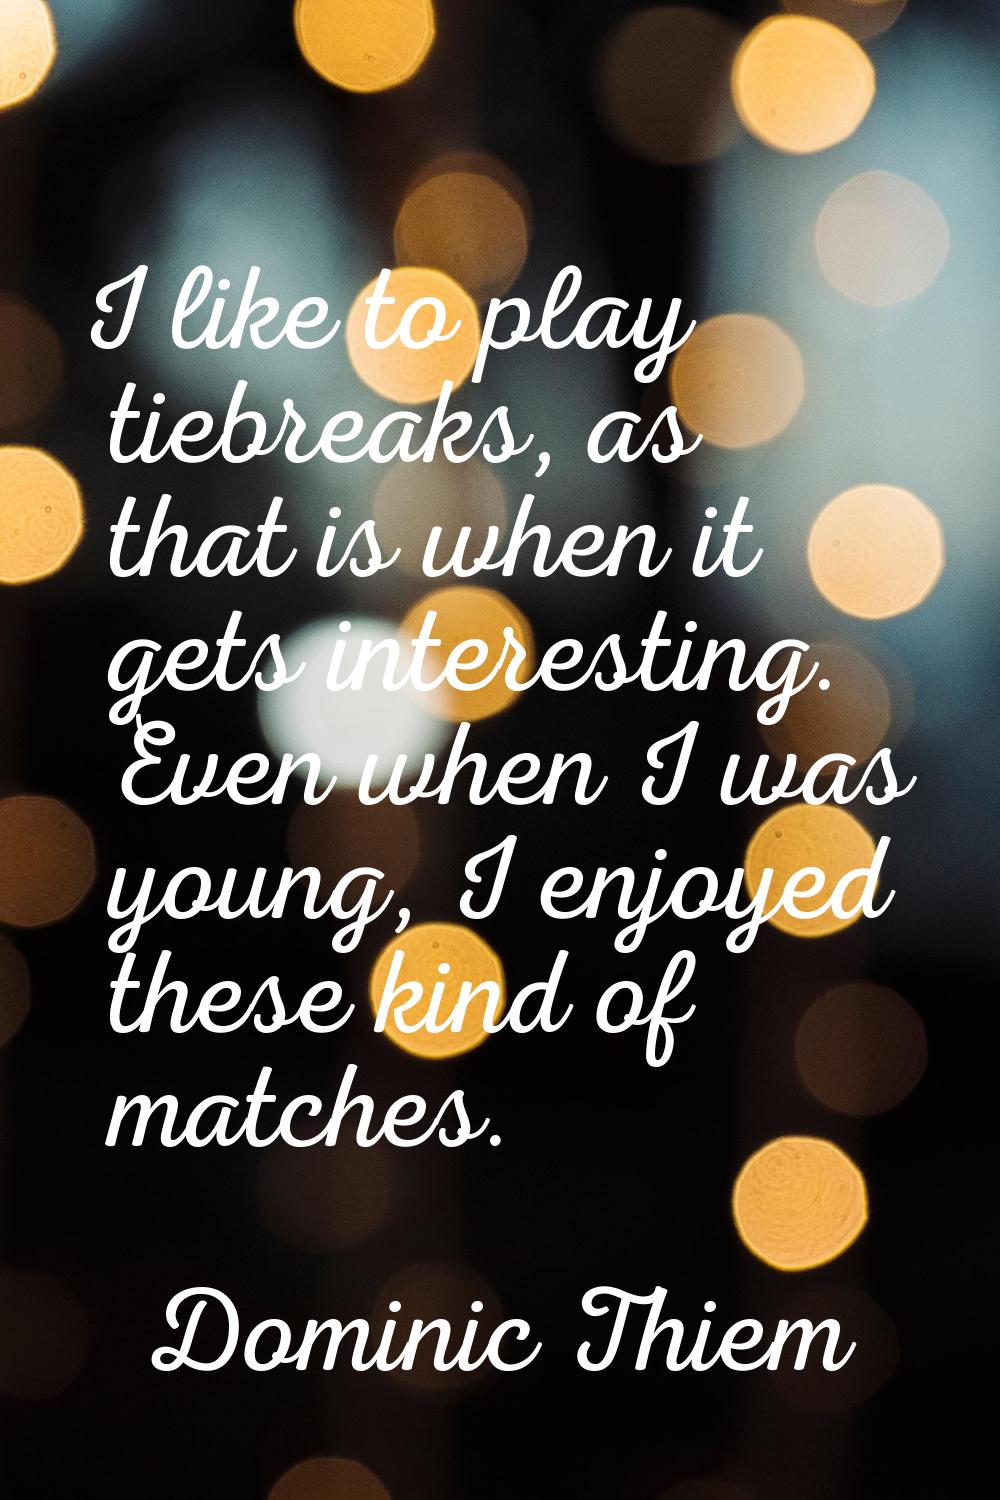 I like to play tiebreaks, as that is when it gets interesting. Even when I was young, I enjoyed the